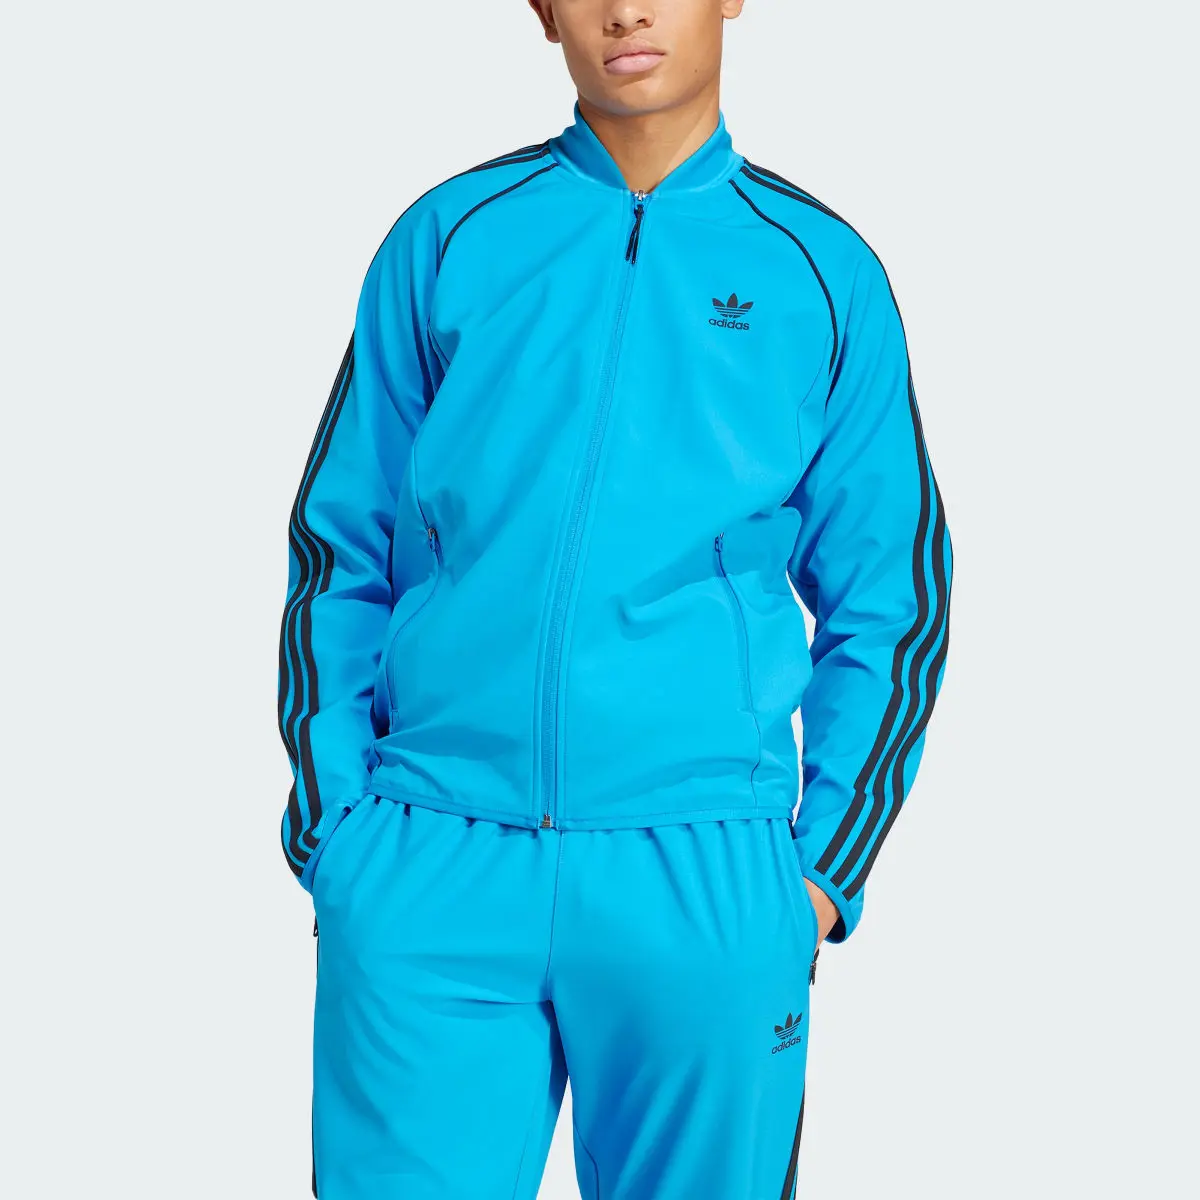 Adidas SST Bonded Track Top. 1